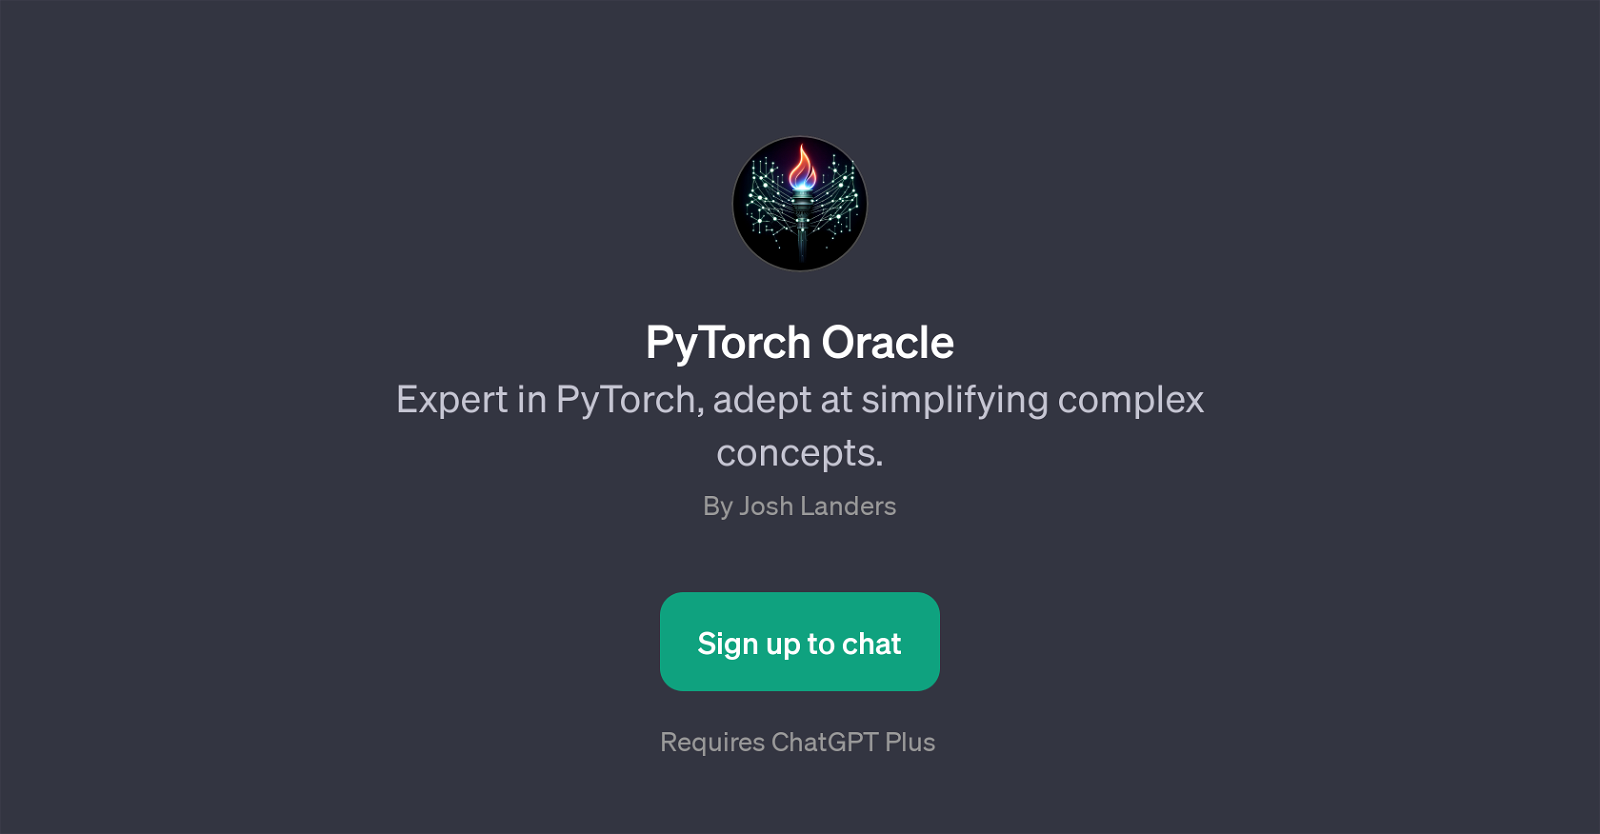 PyTorch Oracle website